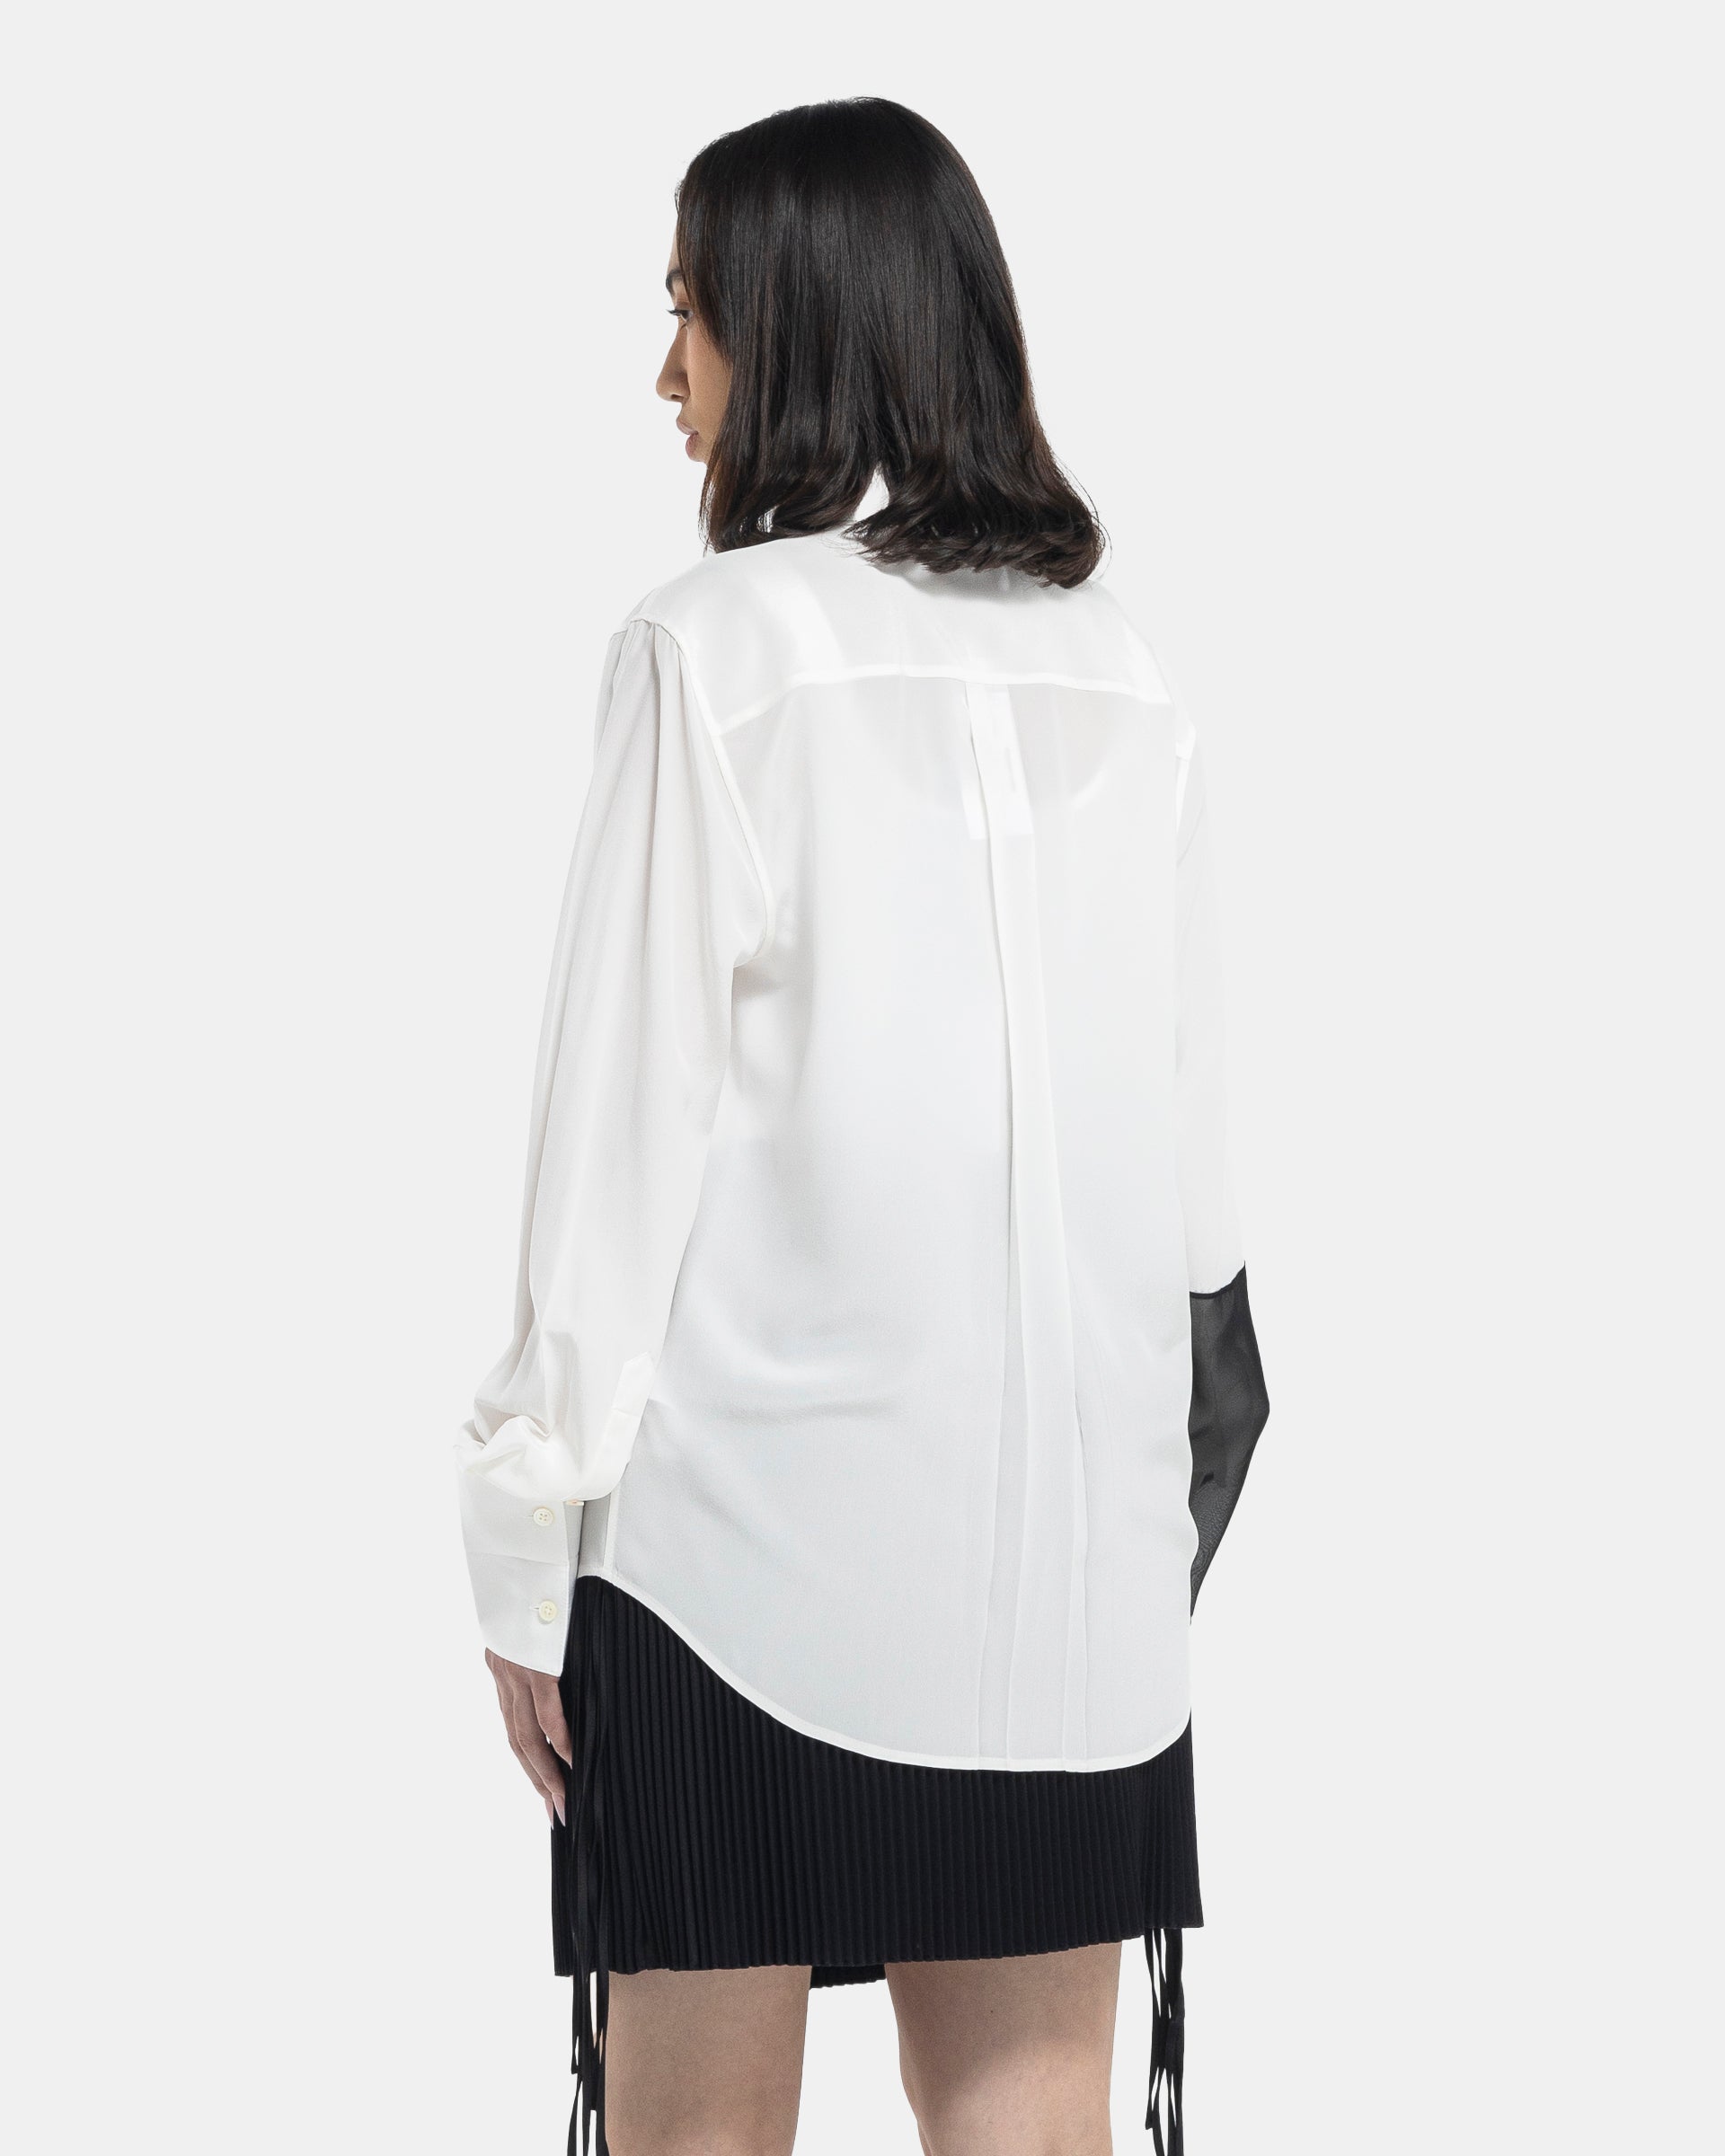 Combo Relaxed Shirt in White and Black